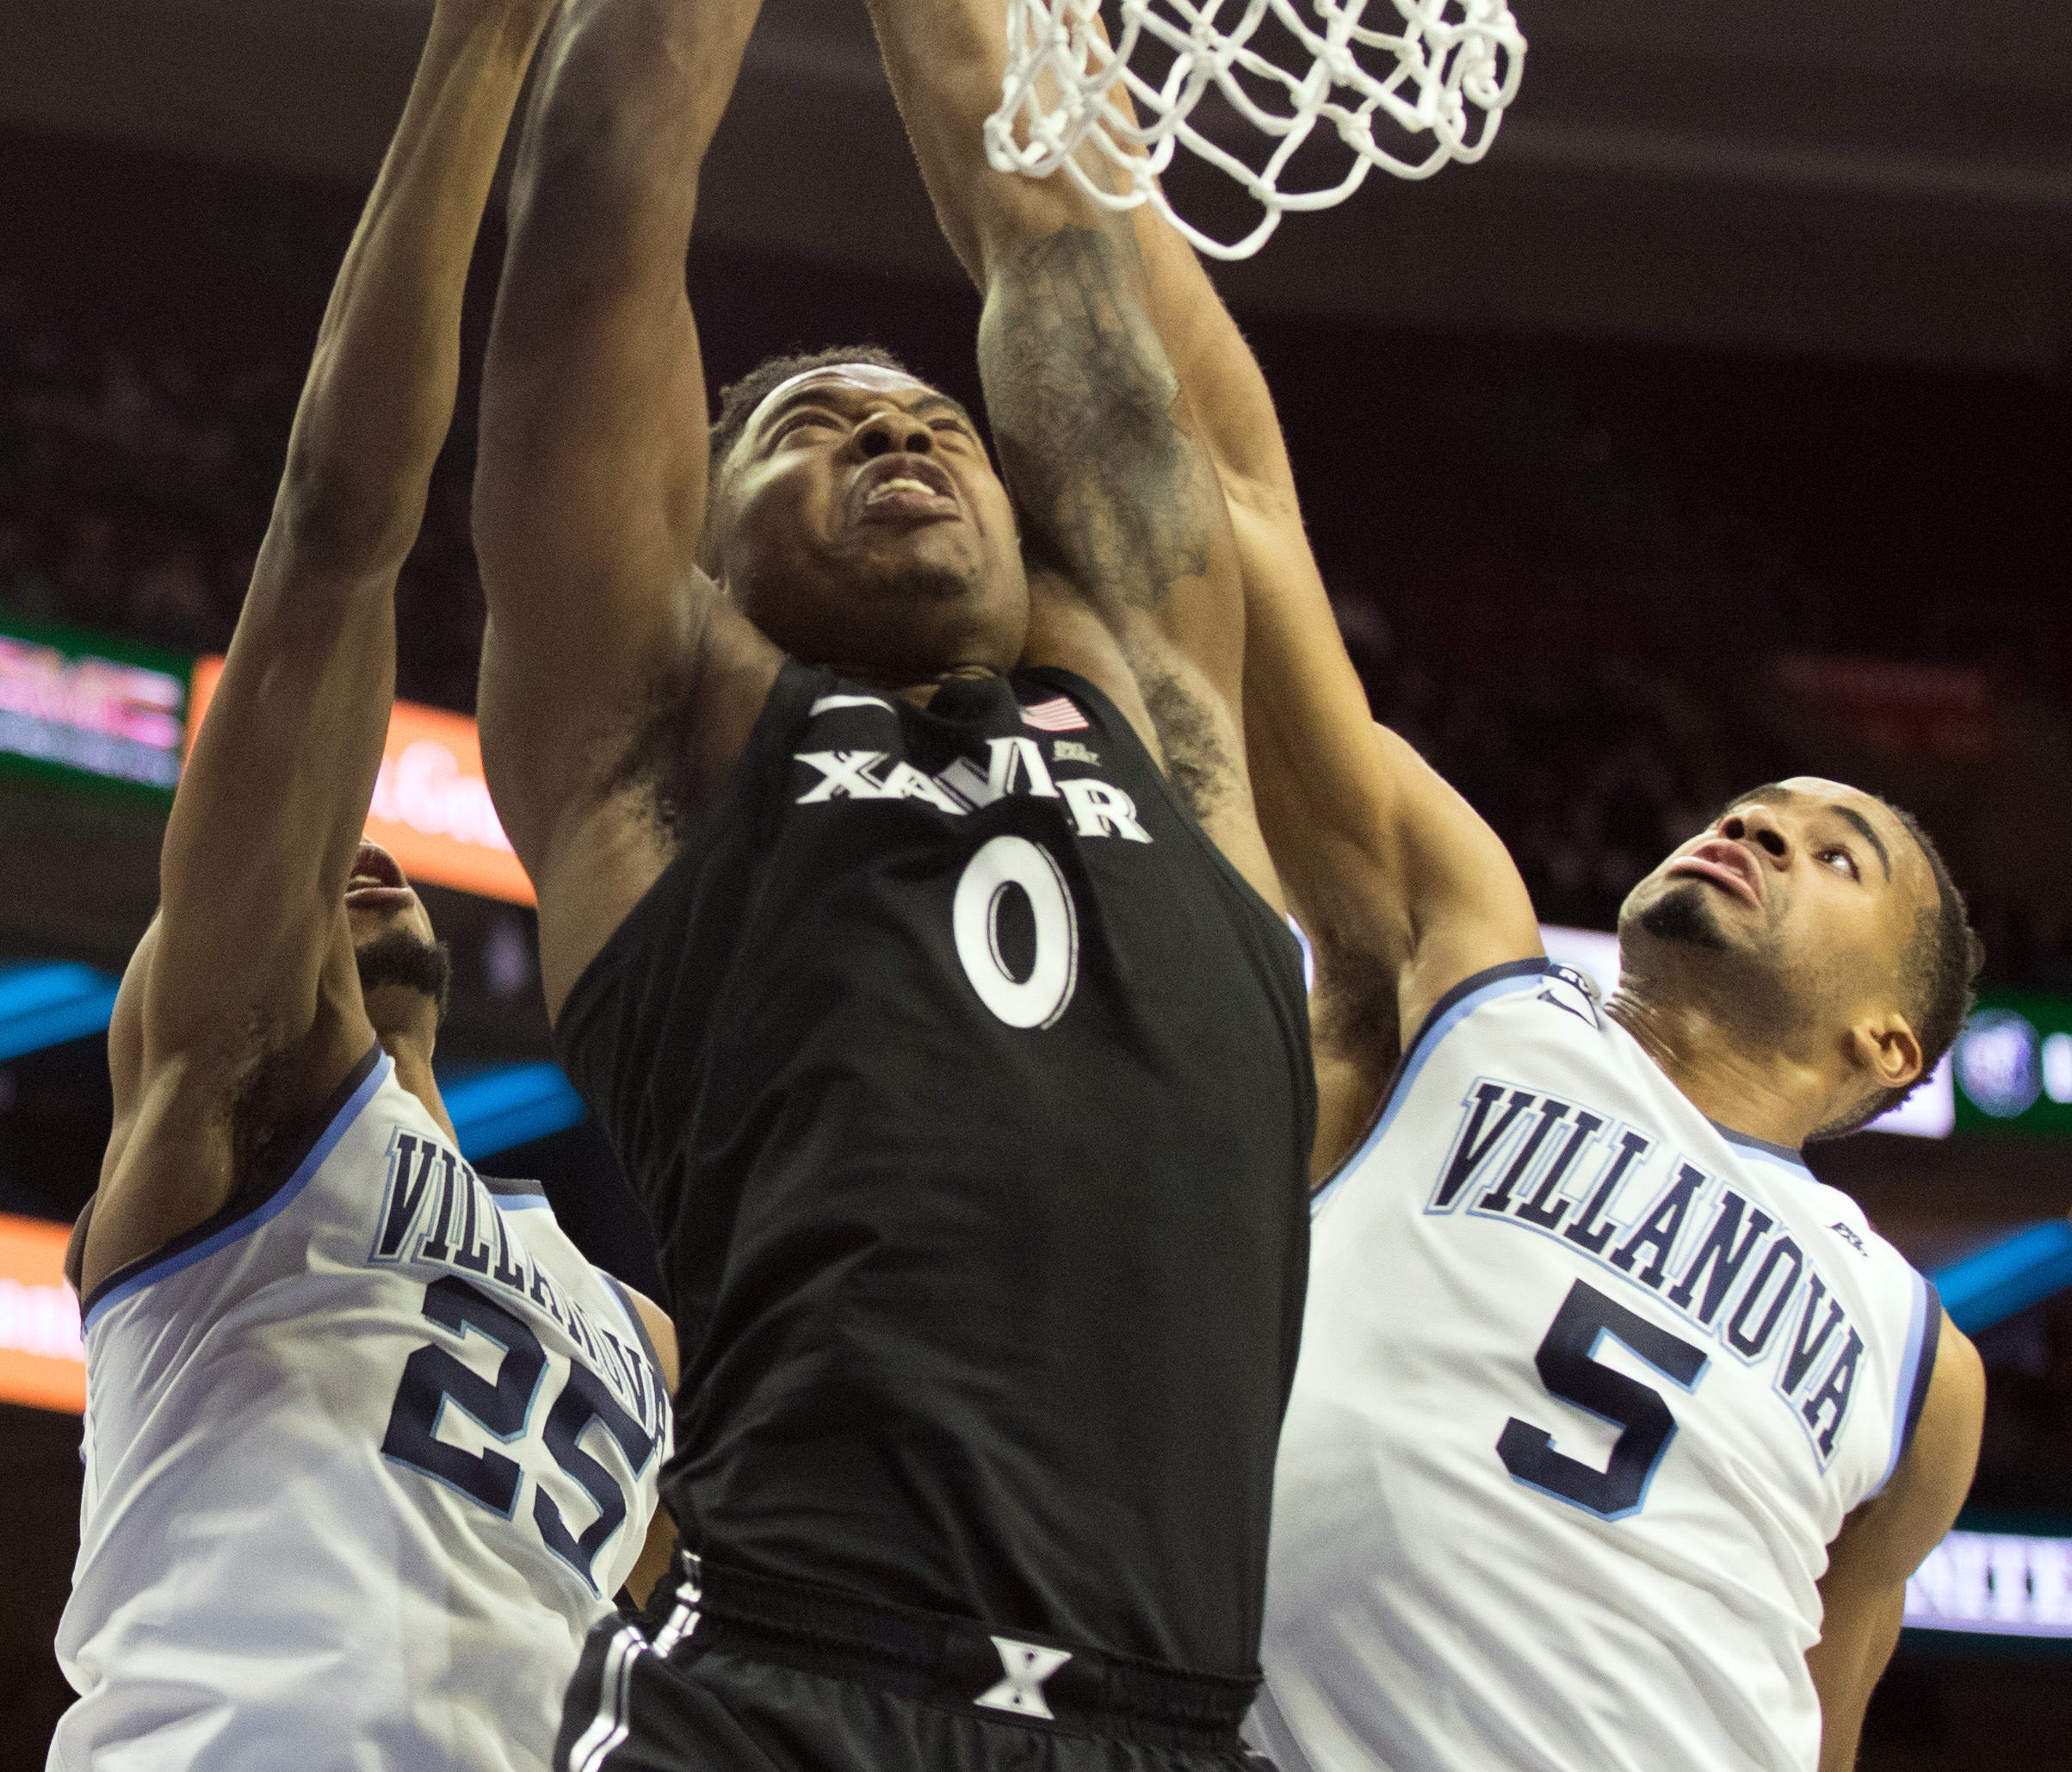 Xavier Musketeers forward Tyrique Jones (0) shoots against the defense of Villanova Wildcats guard Phil Booth (5) and guard Mikal Bridges (25) during the first half at Wells Fargo Center.